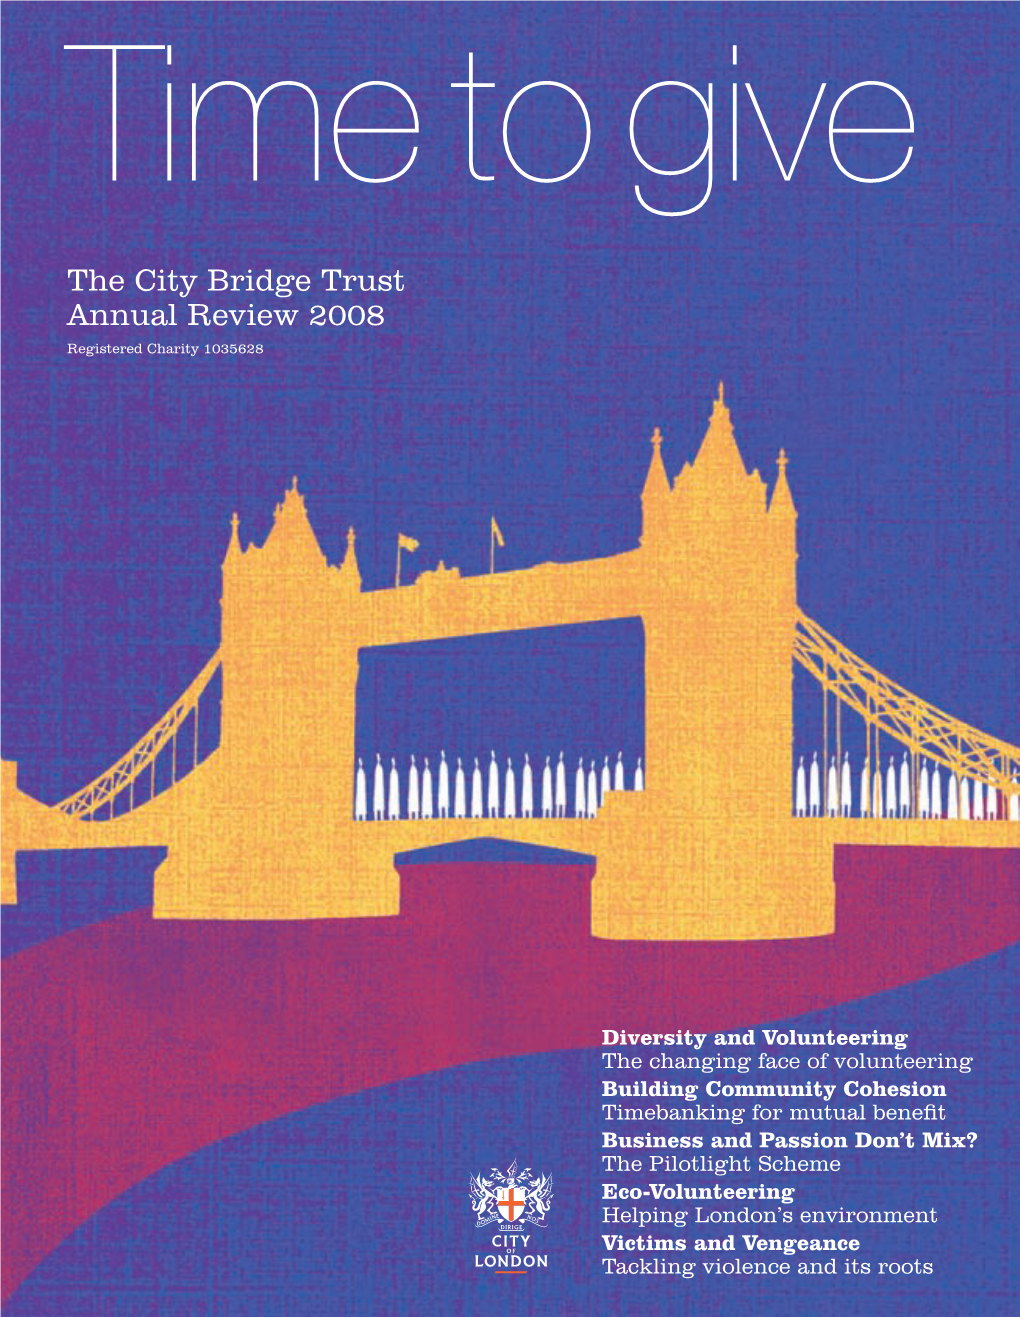 The City Bridge Trust Annual Review 2008 Registered Charity 1035628